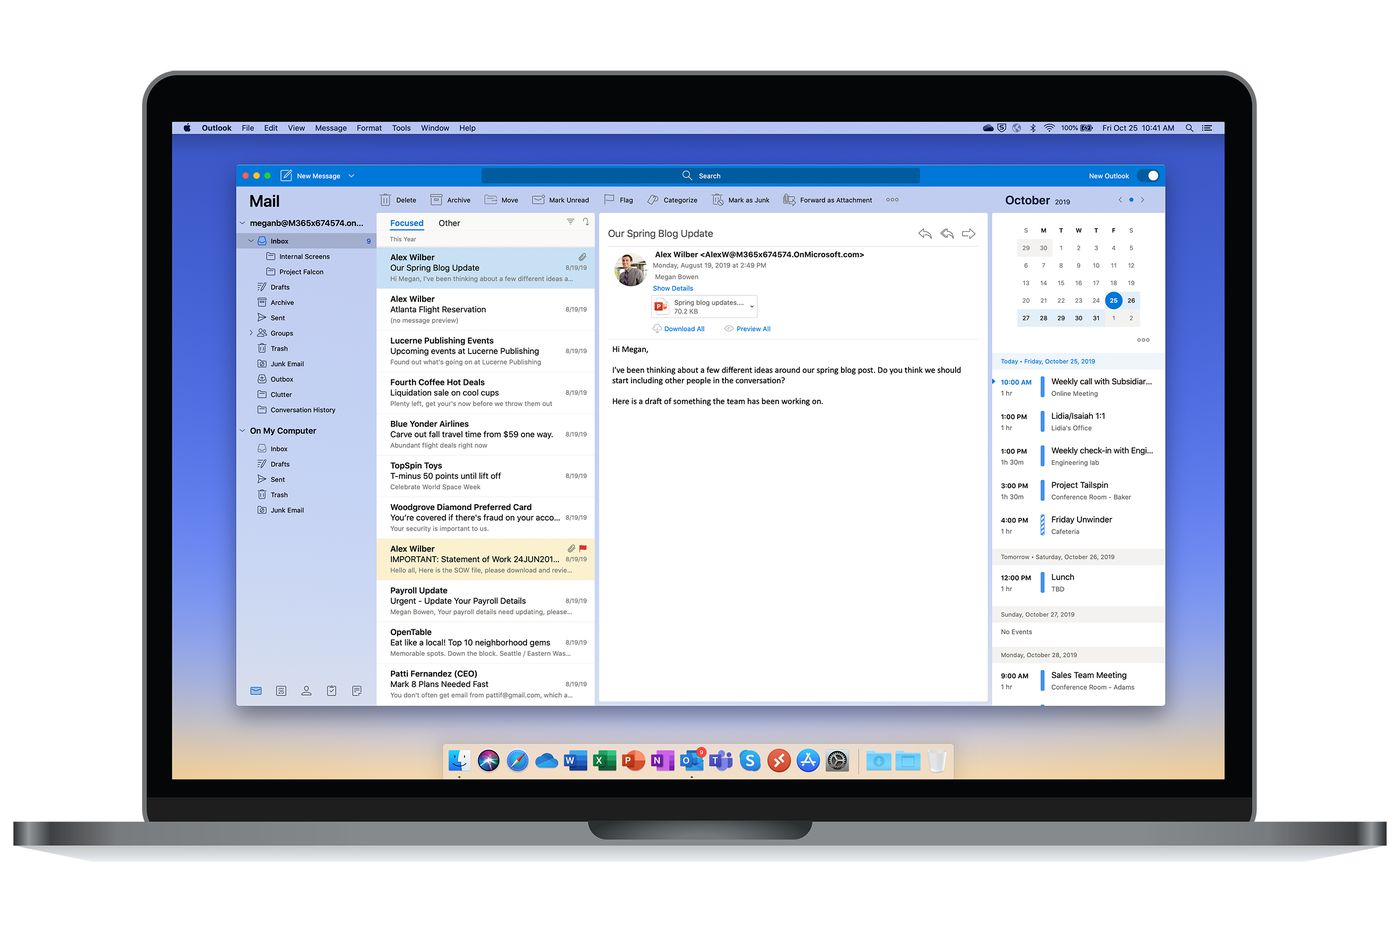 Automatically Download Pictures In Outlook 2019 Mac